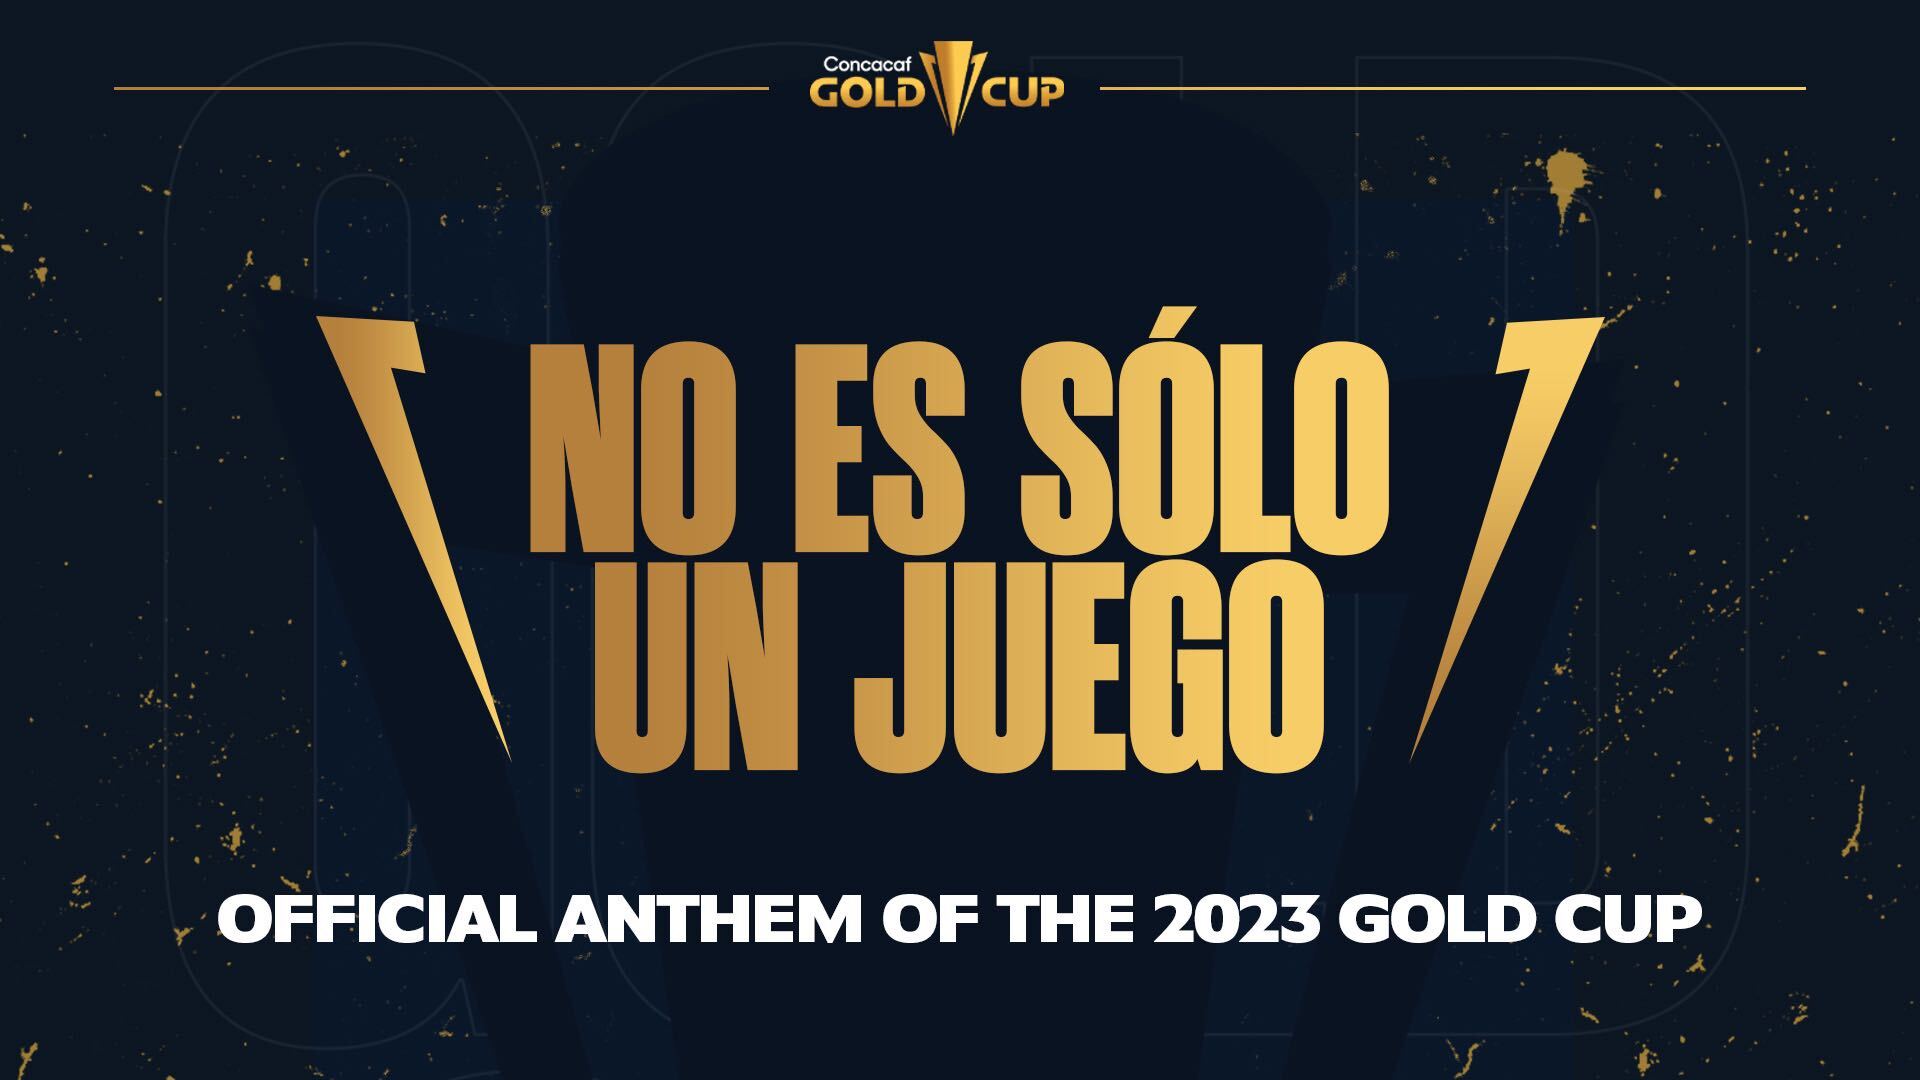 Unstoppable! Lasso will put music to the Concacaf Gold Cup